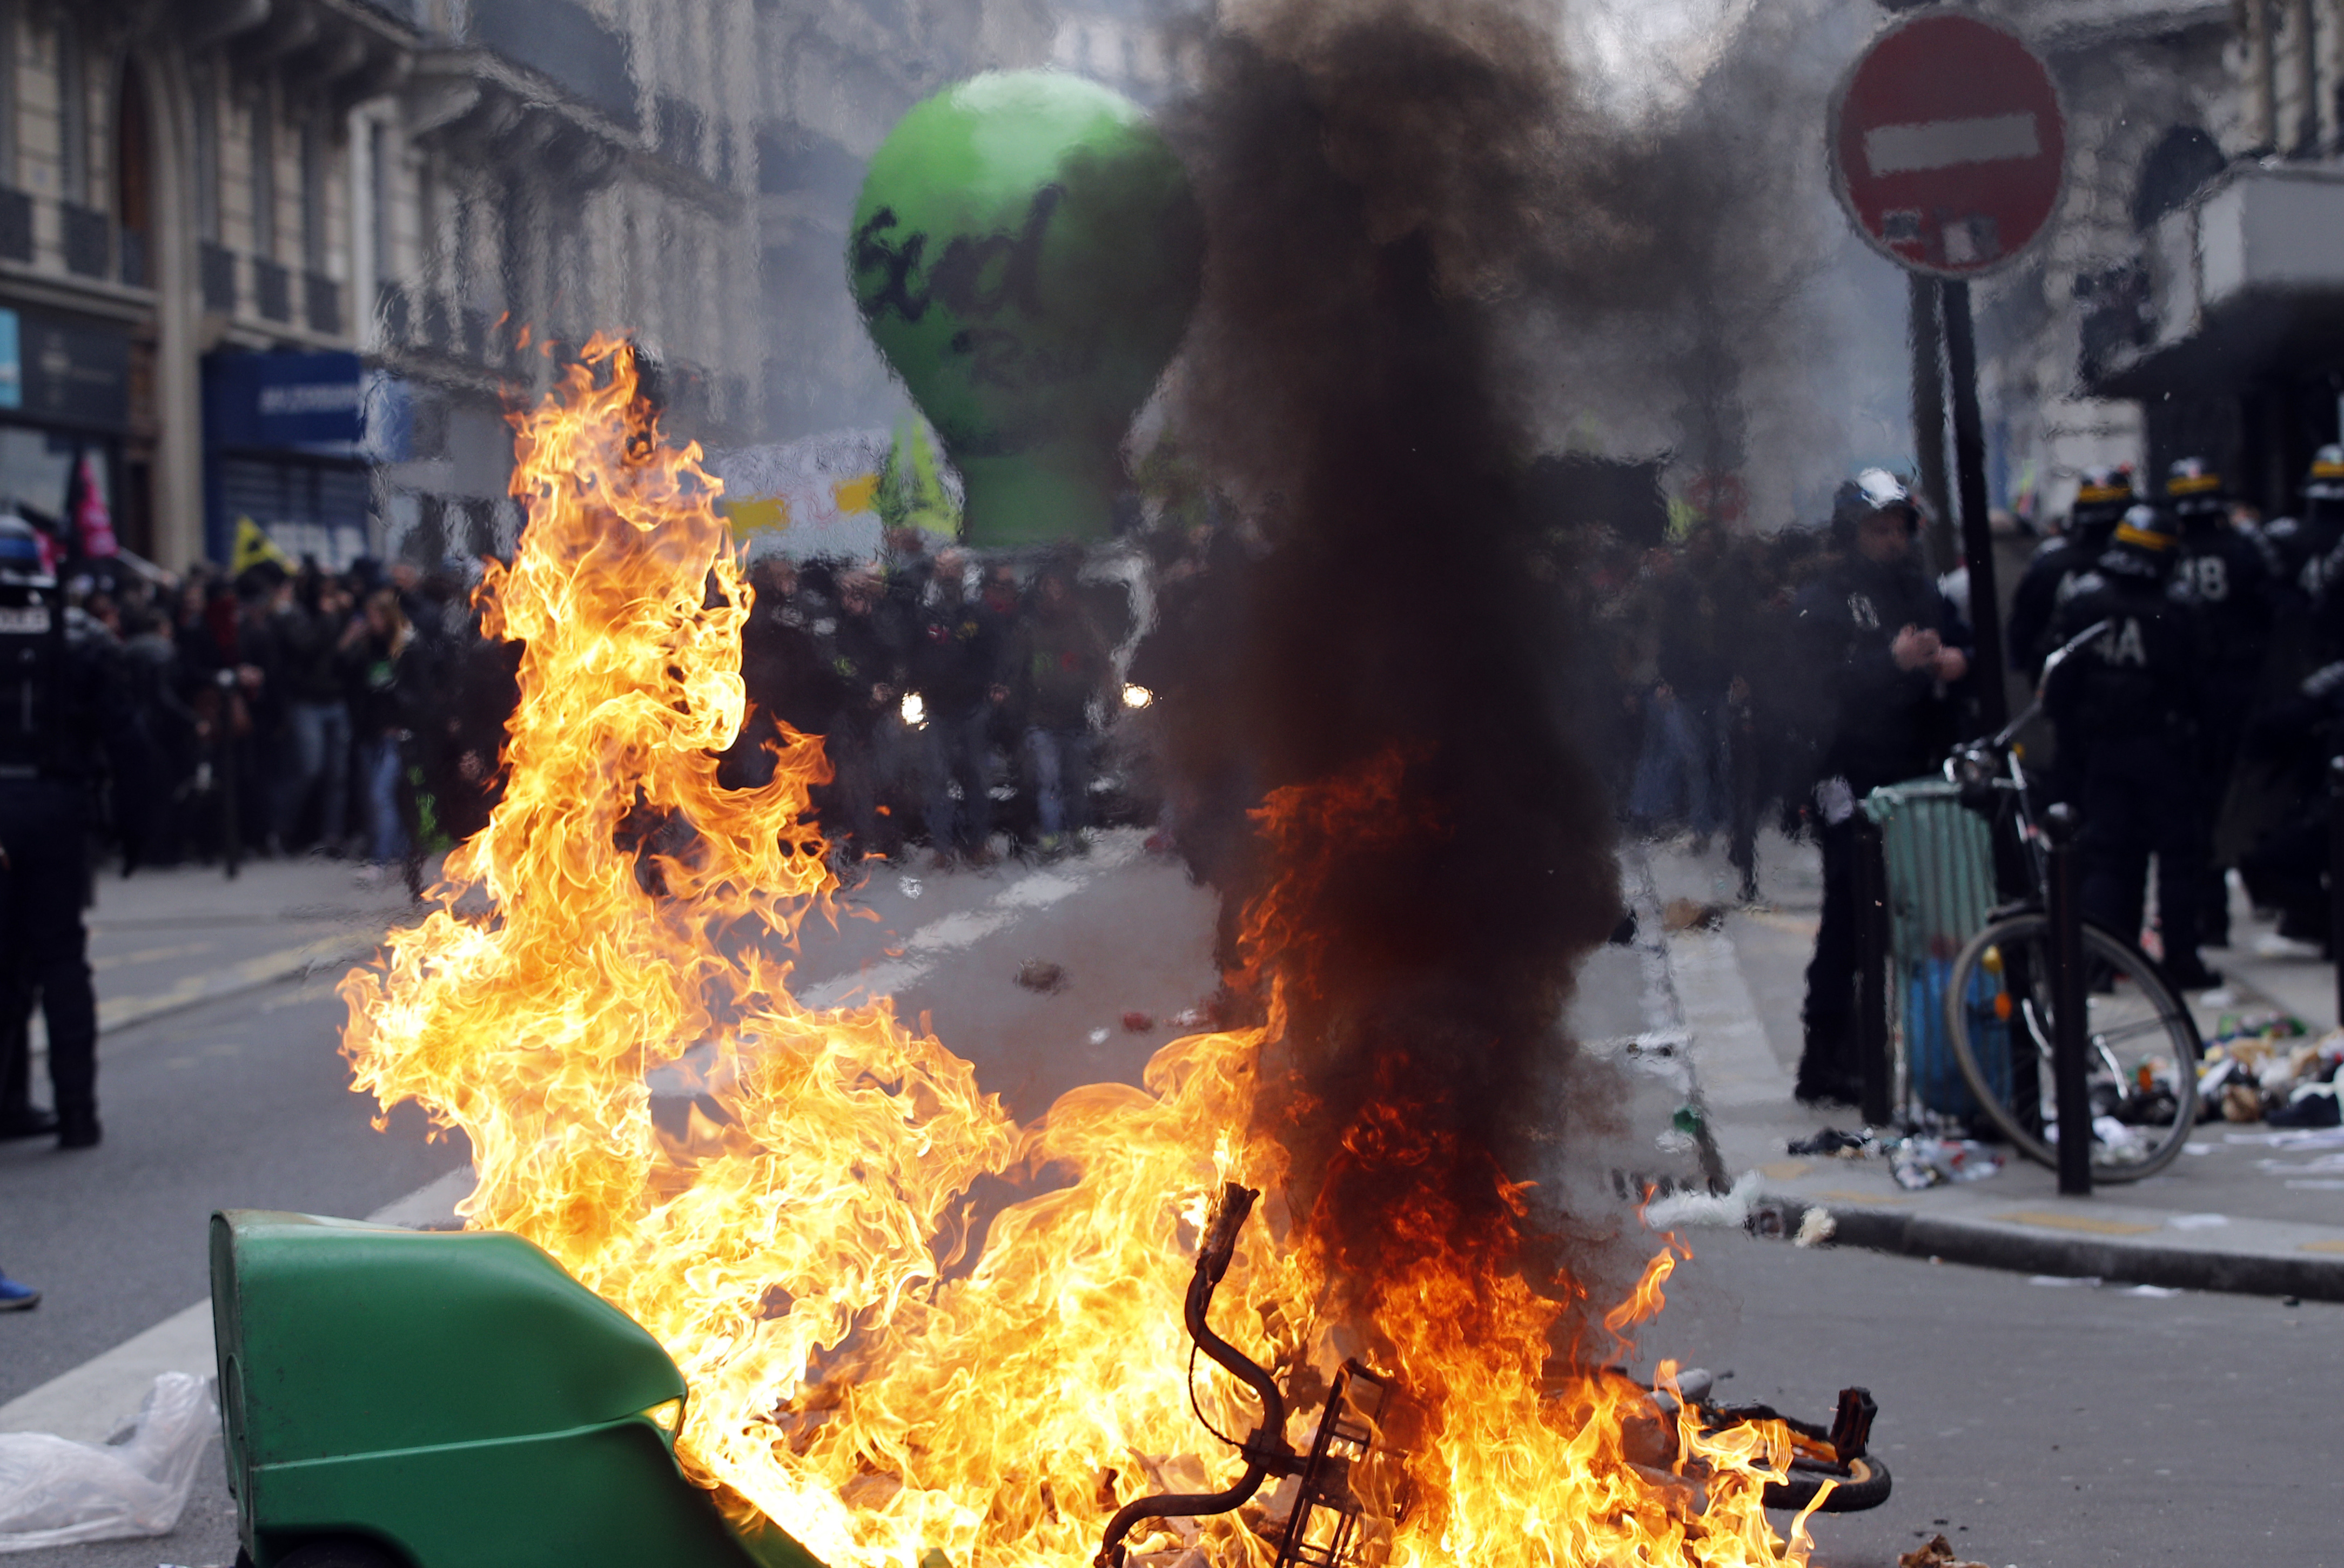 French riot police stand next a burning garbage can during a rail workers demonstration in Paris, Tuesday, April 3, 2018. French unions plan strikes two days every week through June to protest government plans to eliminate some rail worker benefits — part of broader European plans to open national railways to competition. (AP Photo/Christophe Ena)